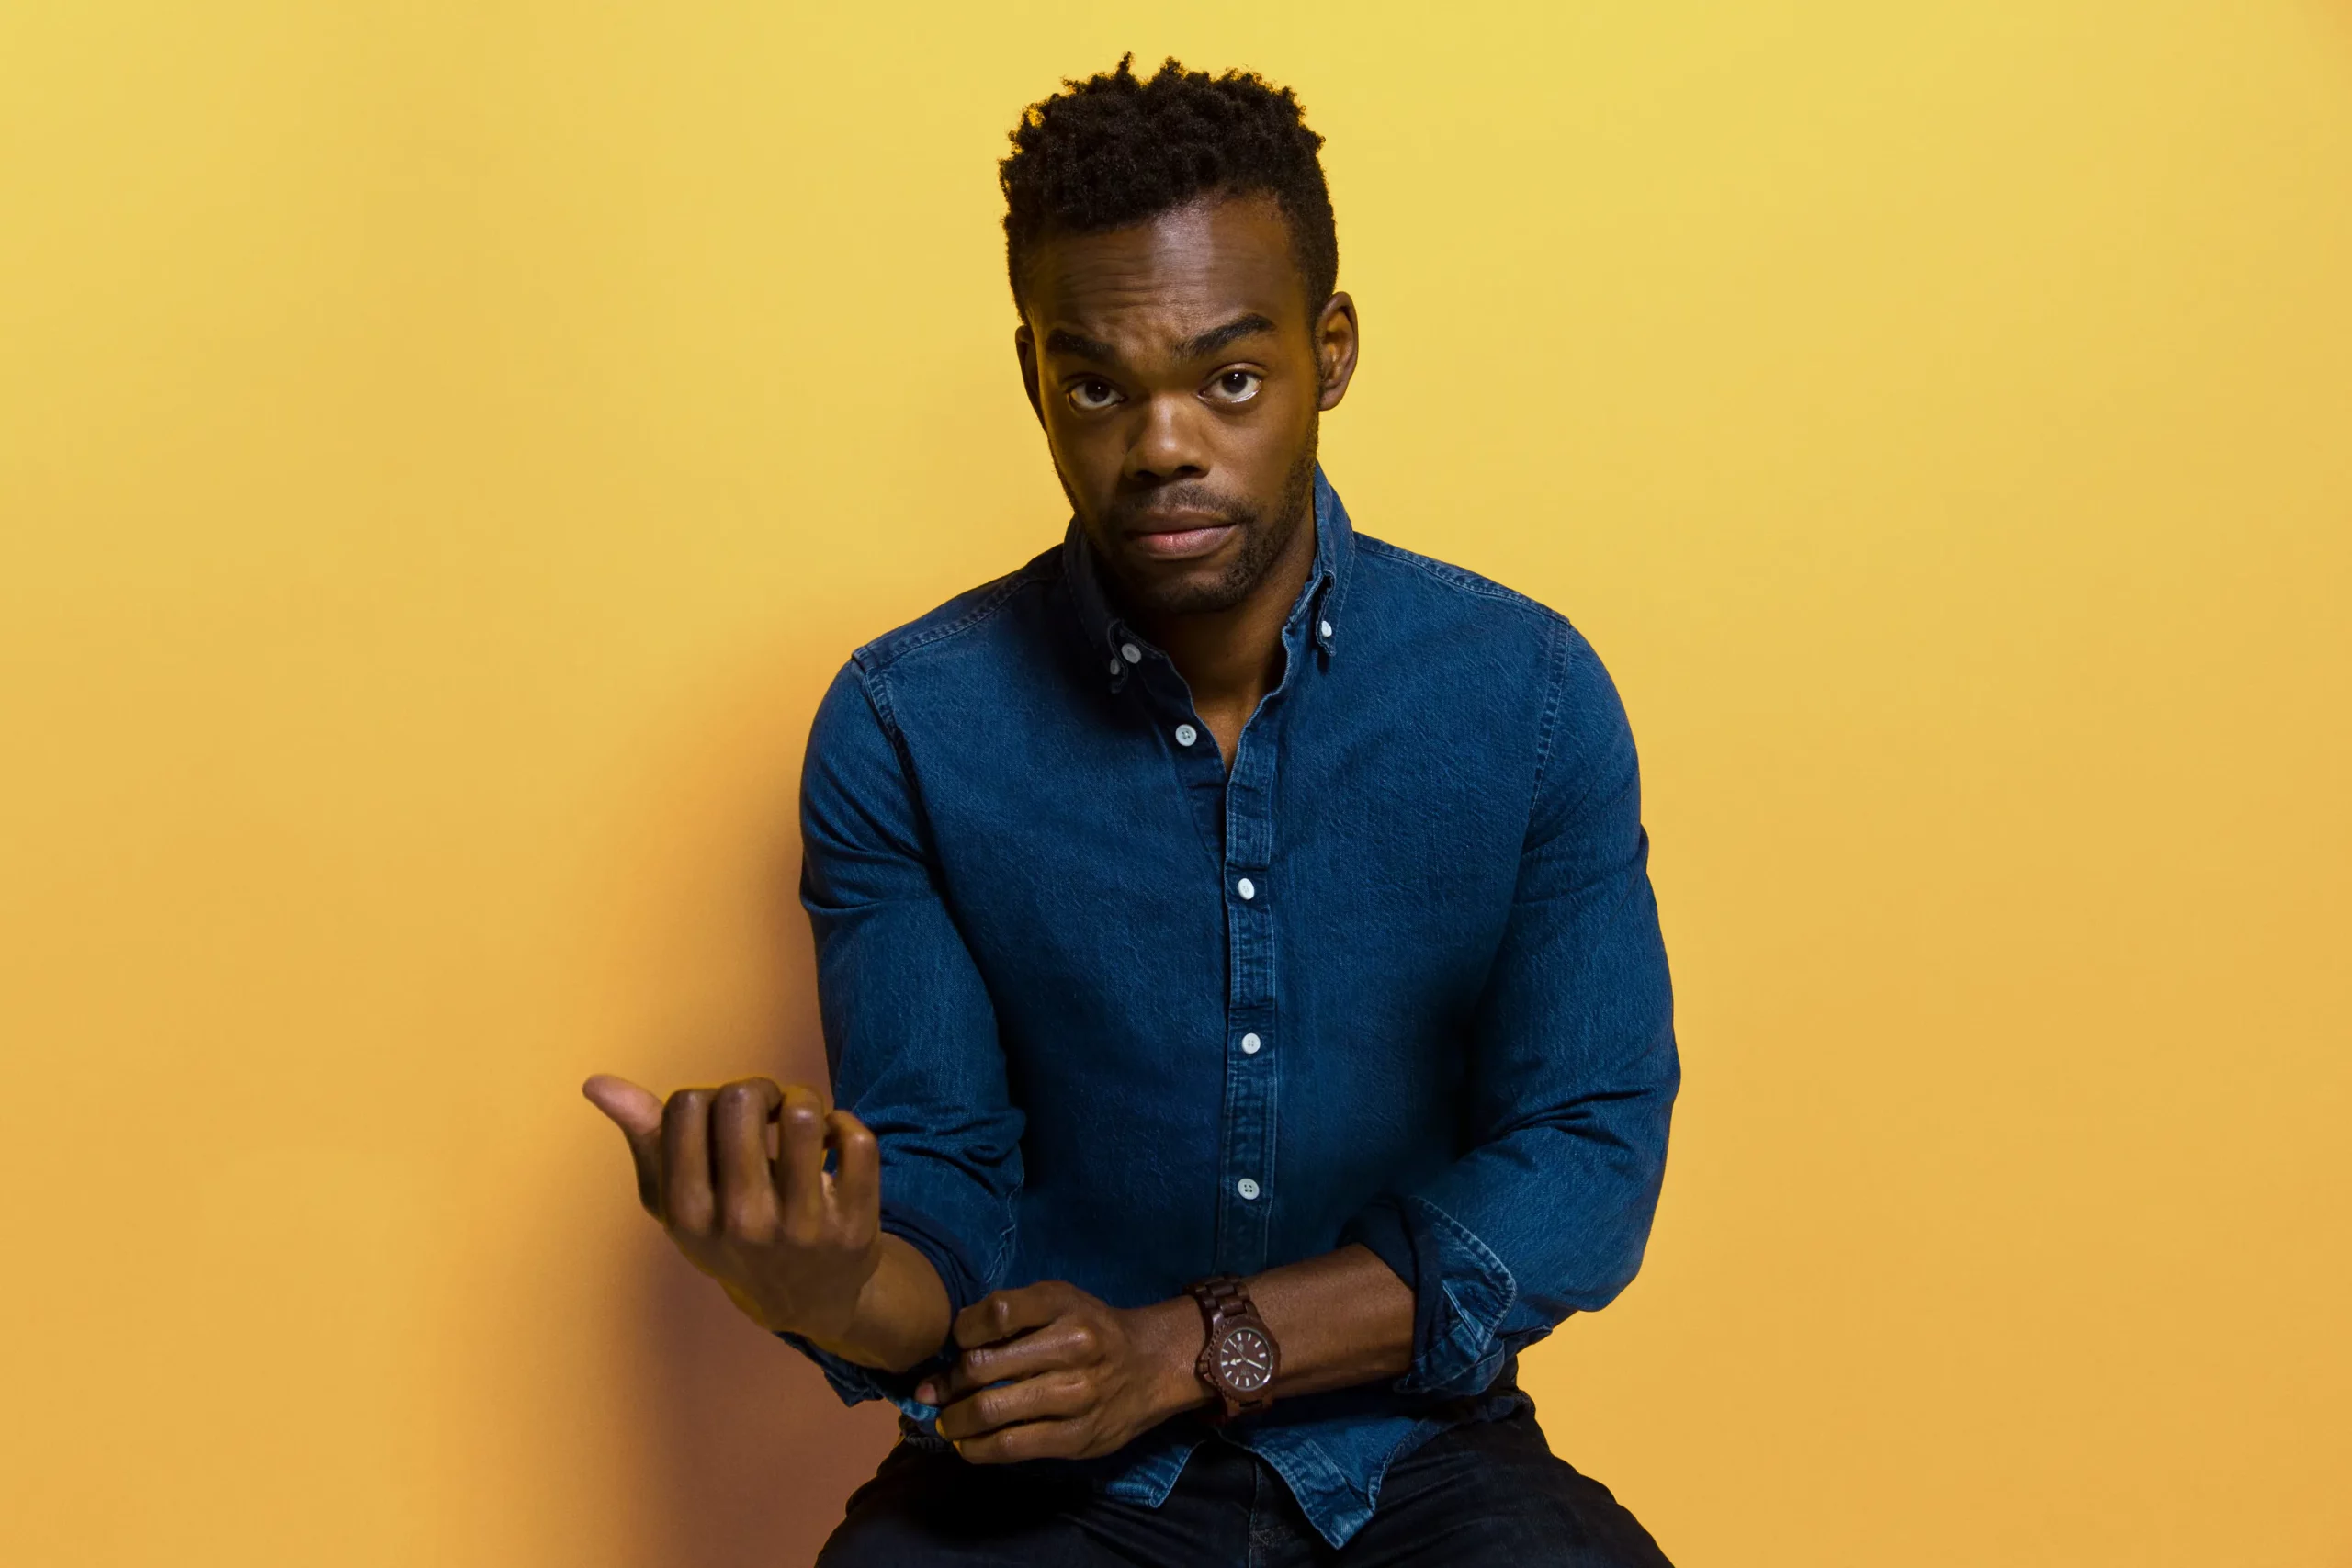 William Jackson Harper plays Chidi Anagonye in The Good Place (2016 - 2020).